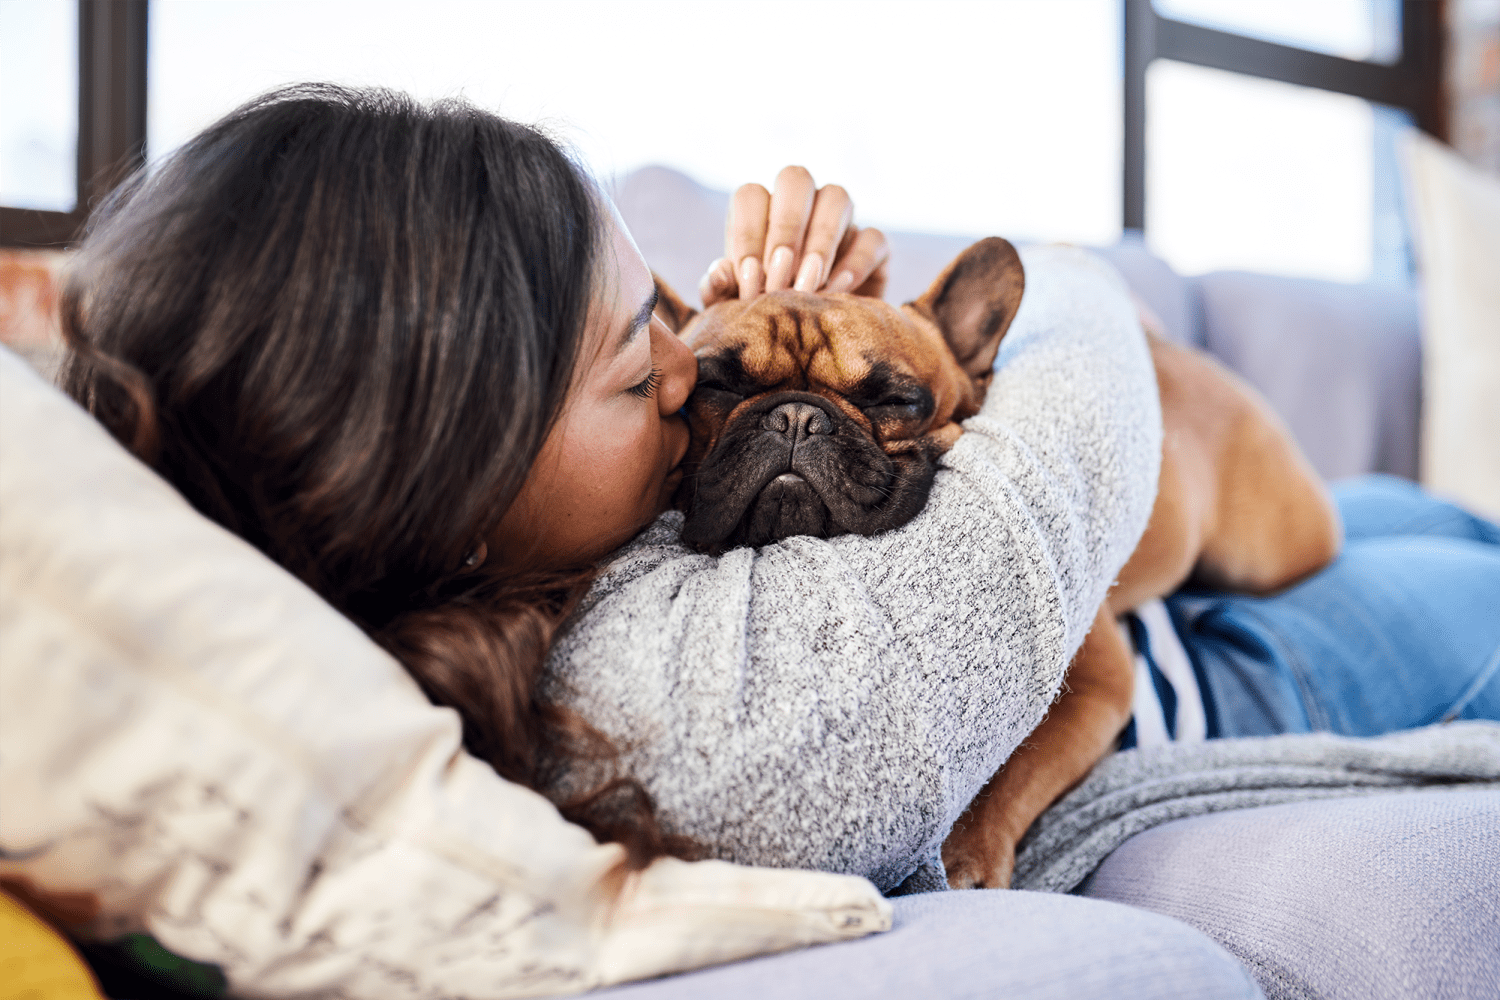 Resident snuggling with her French bulldog at Eatoncrest Apartment Homes in Eatontown, New Jersey